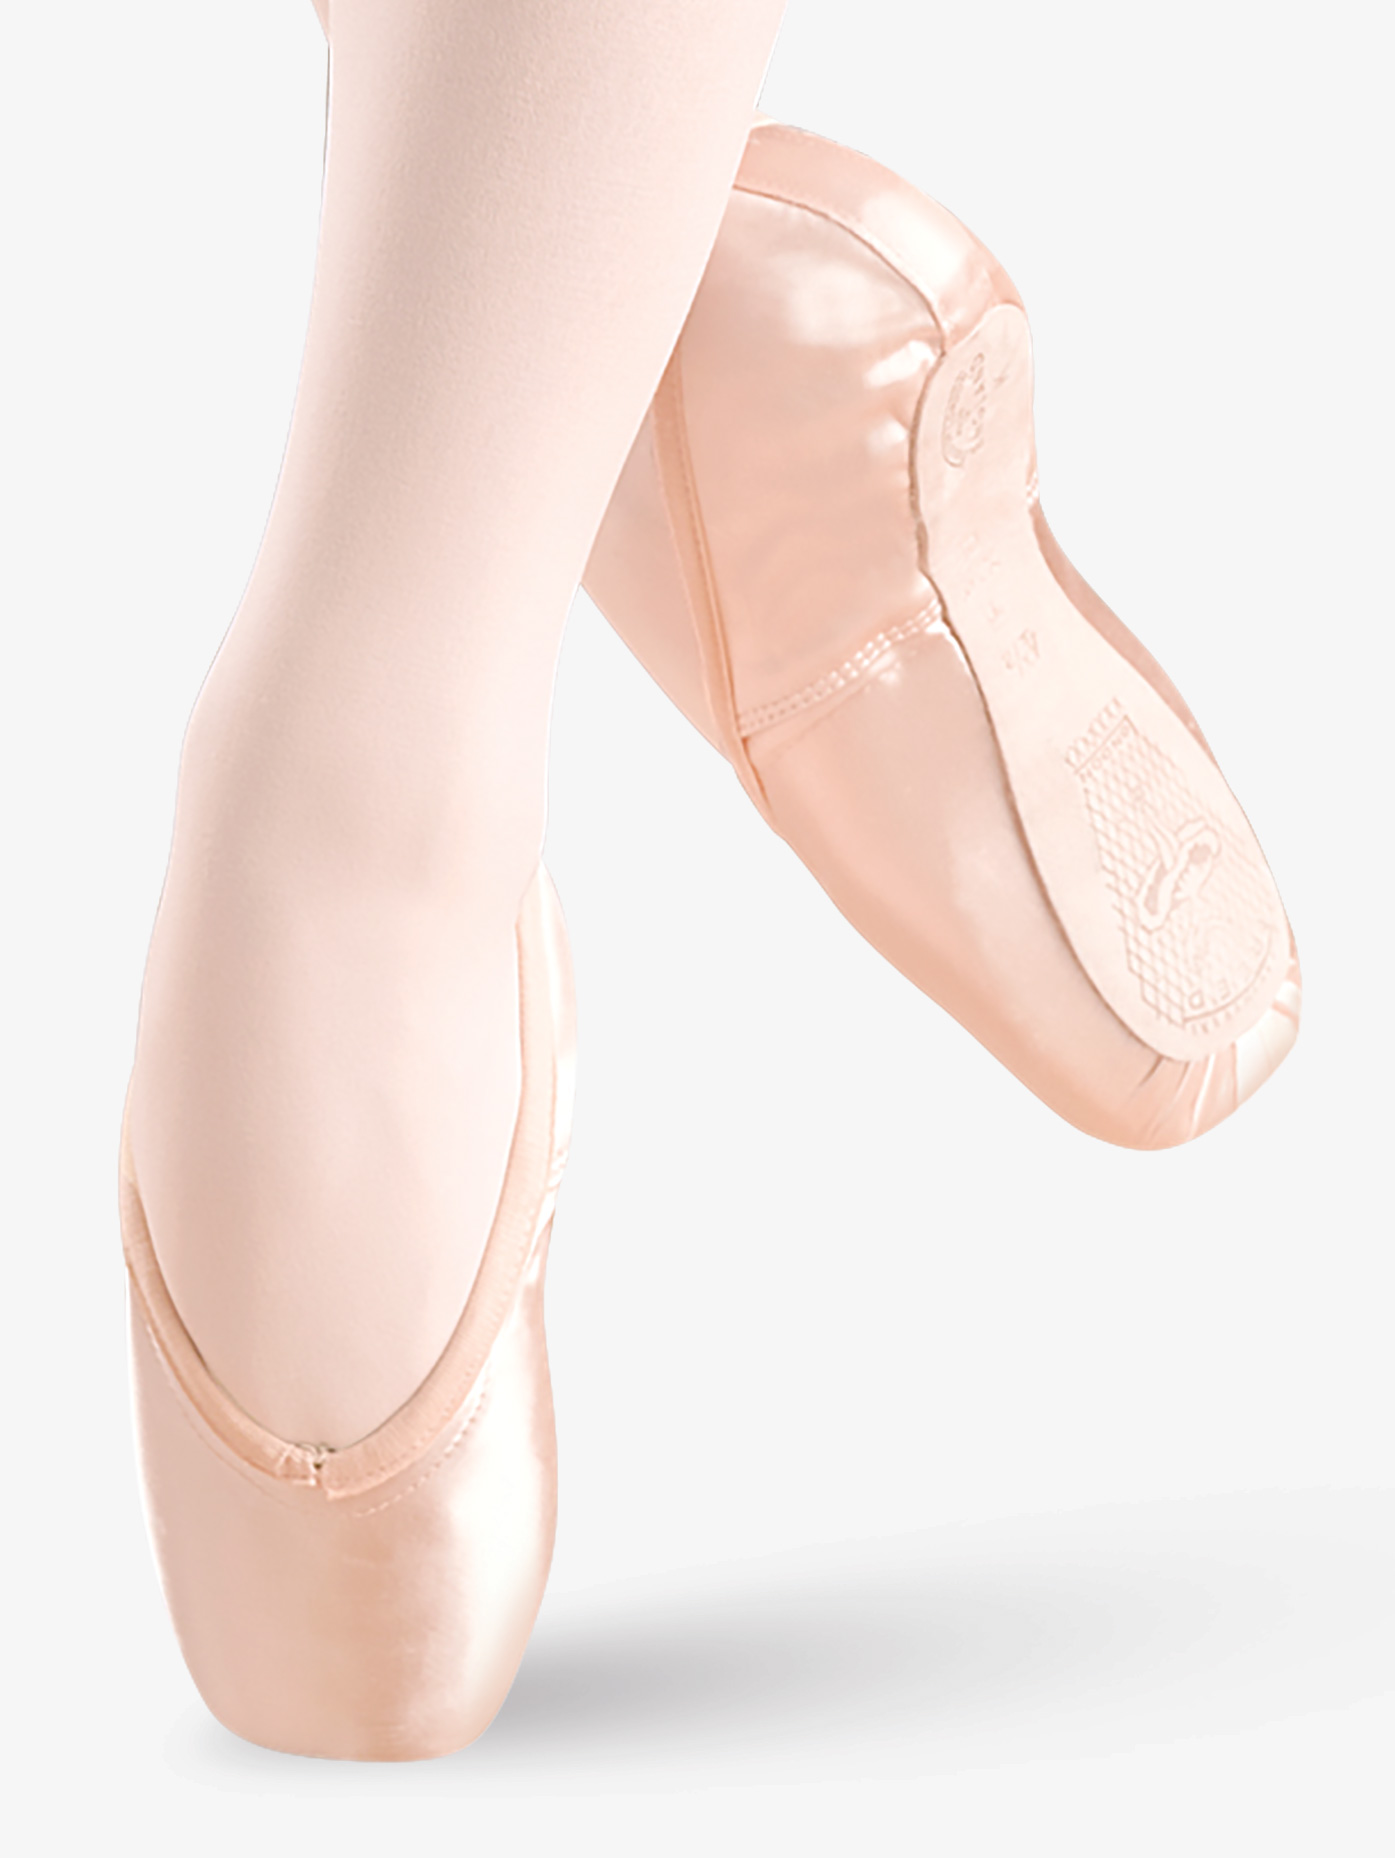 Freed Pointe Shoe Makers Chart